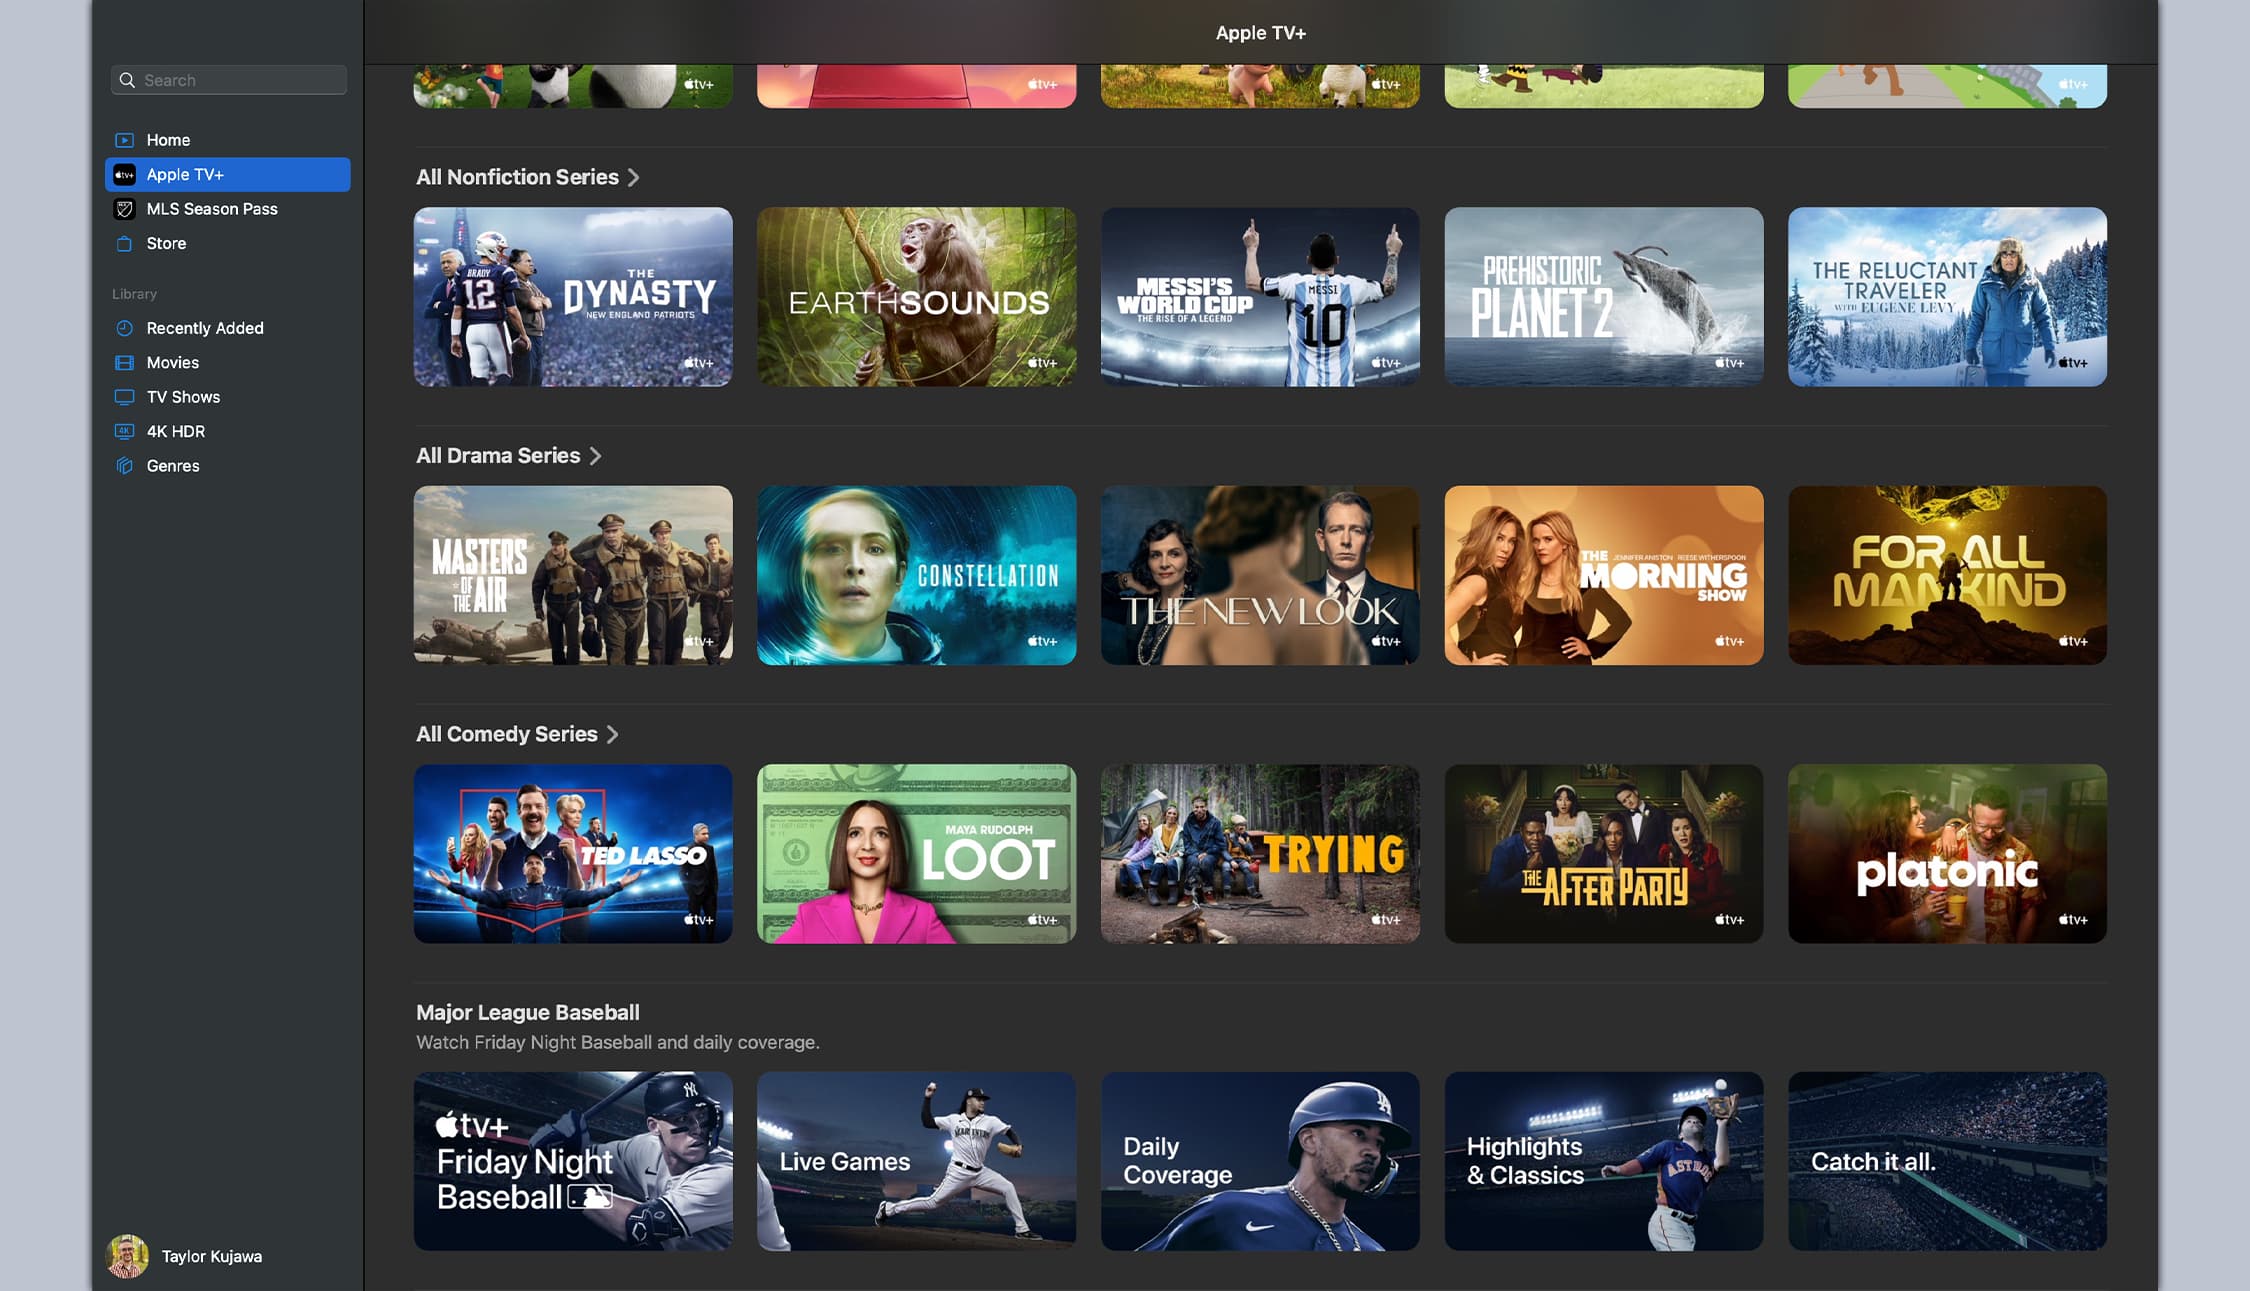 The Apple TV Plus home screen displays rows of TV series and MLB content.